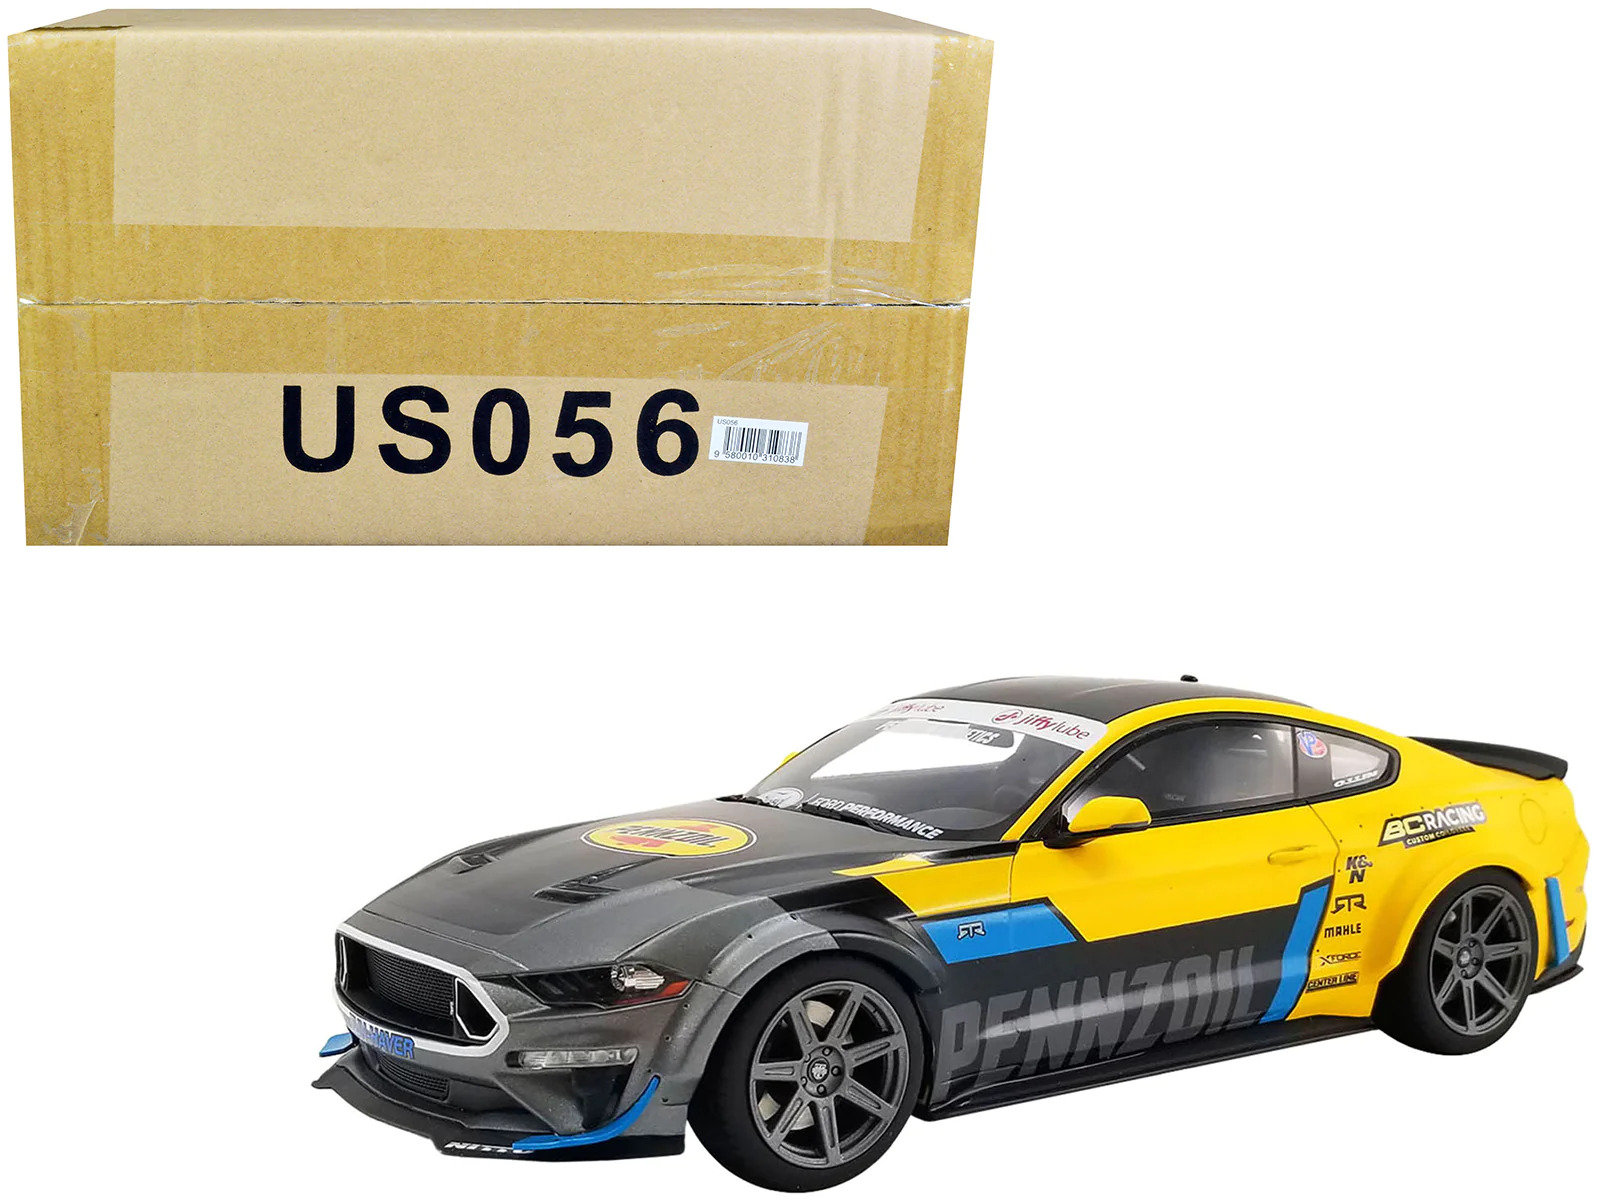 2021 Ford Mustang RTR Spec Widebody Pennzoil Livery 1/18 Model Car